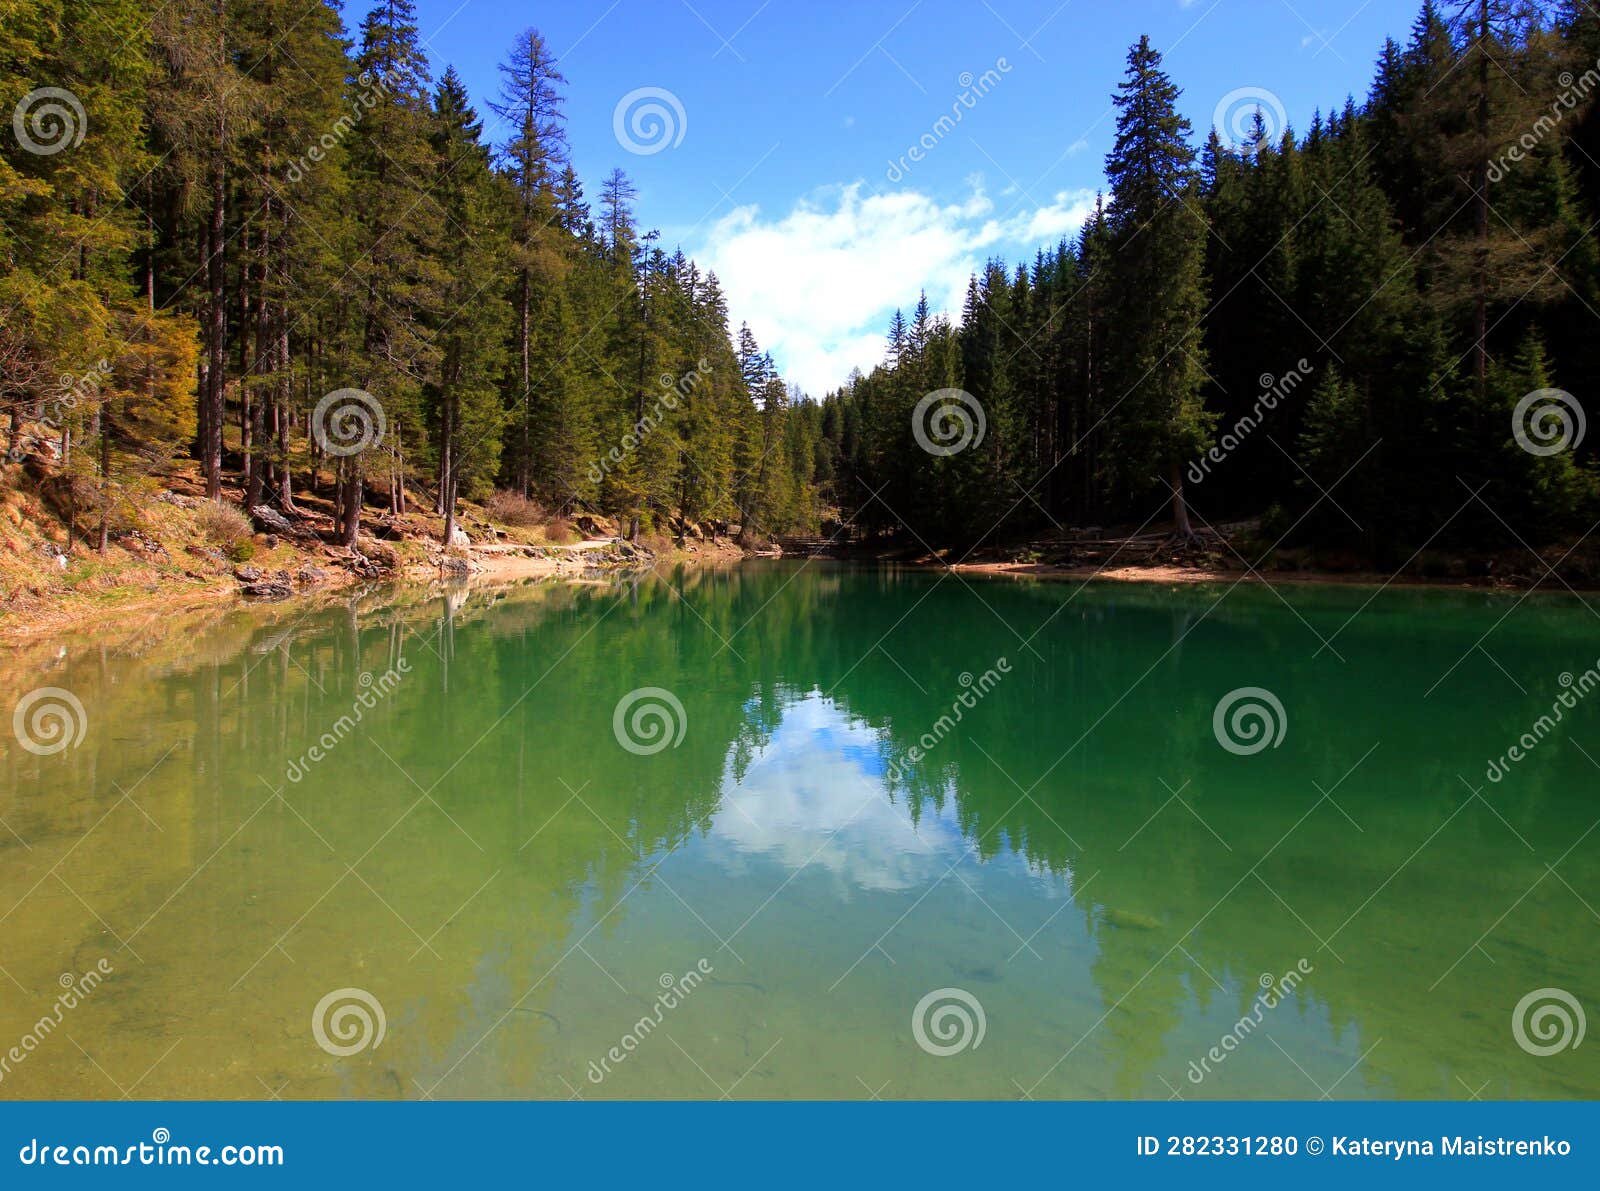 landscape with the emerald surface of lago di braies lake and pine trees on the shore in the dolomites, italy